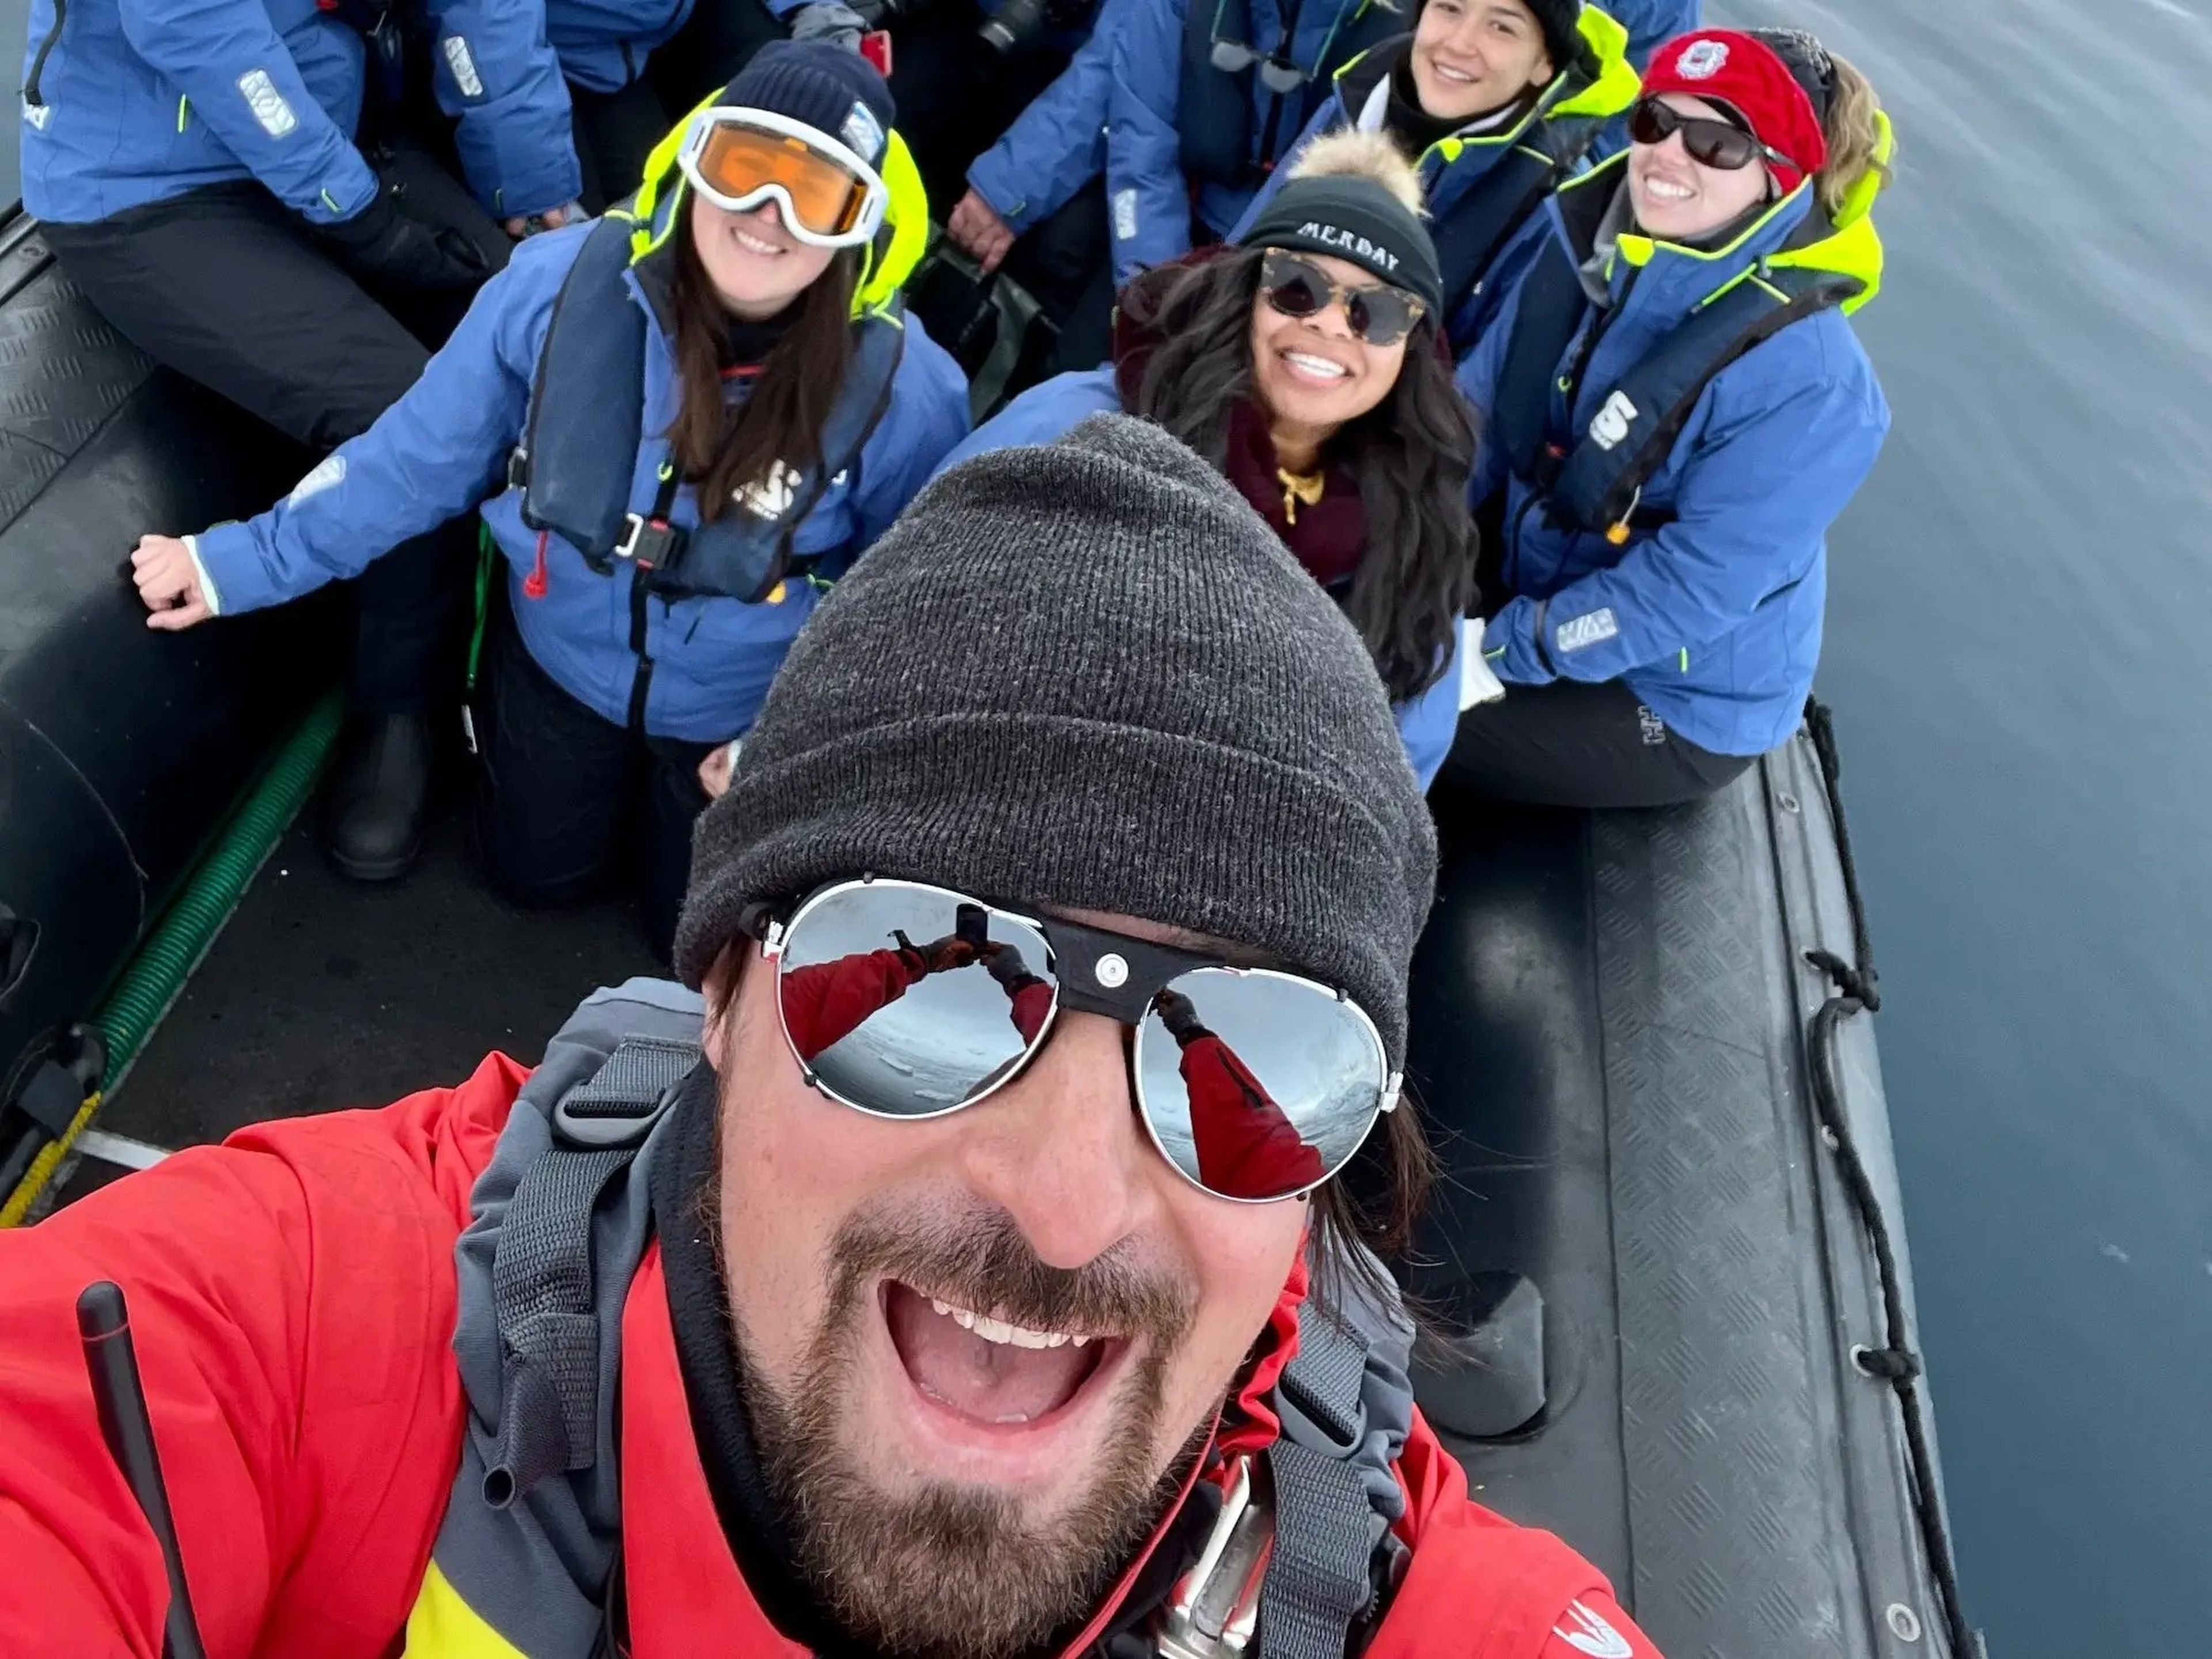 A selfie on the zodiac with one of our guides, Andrew.